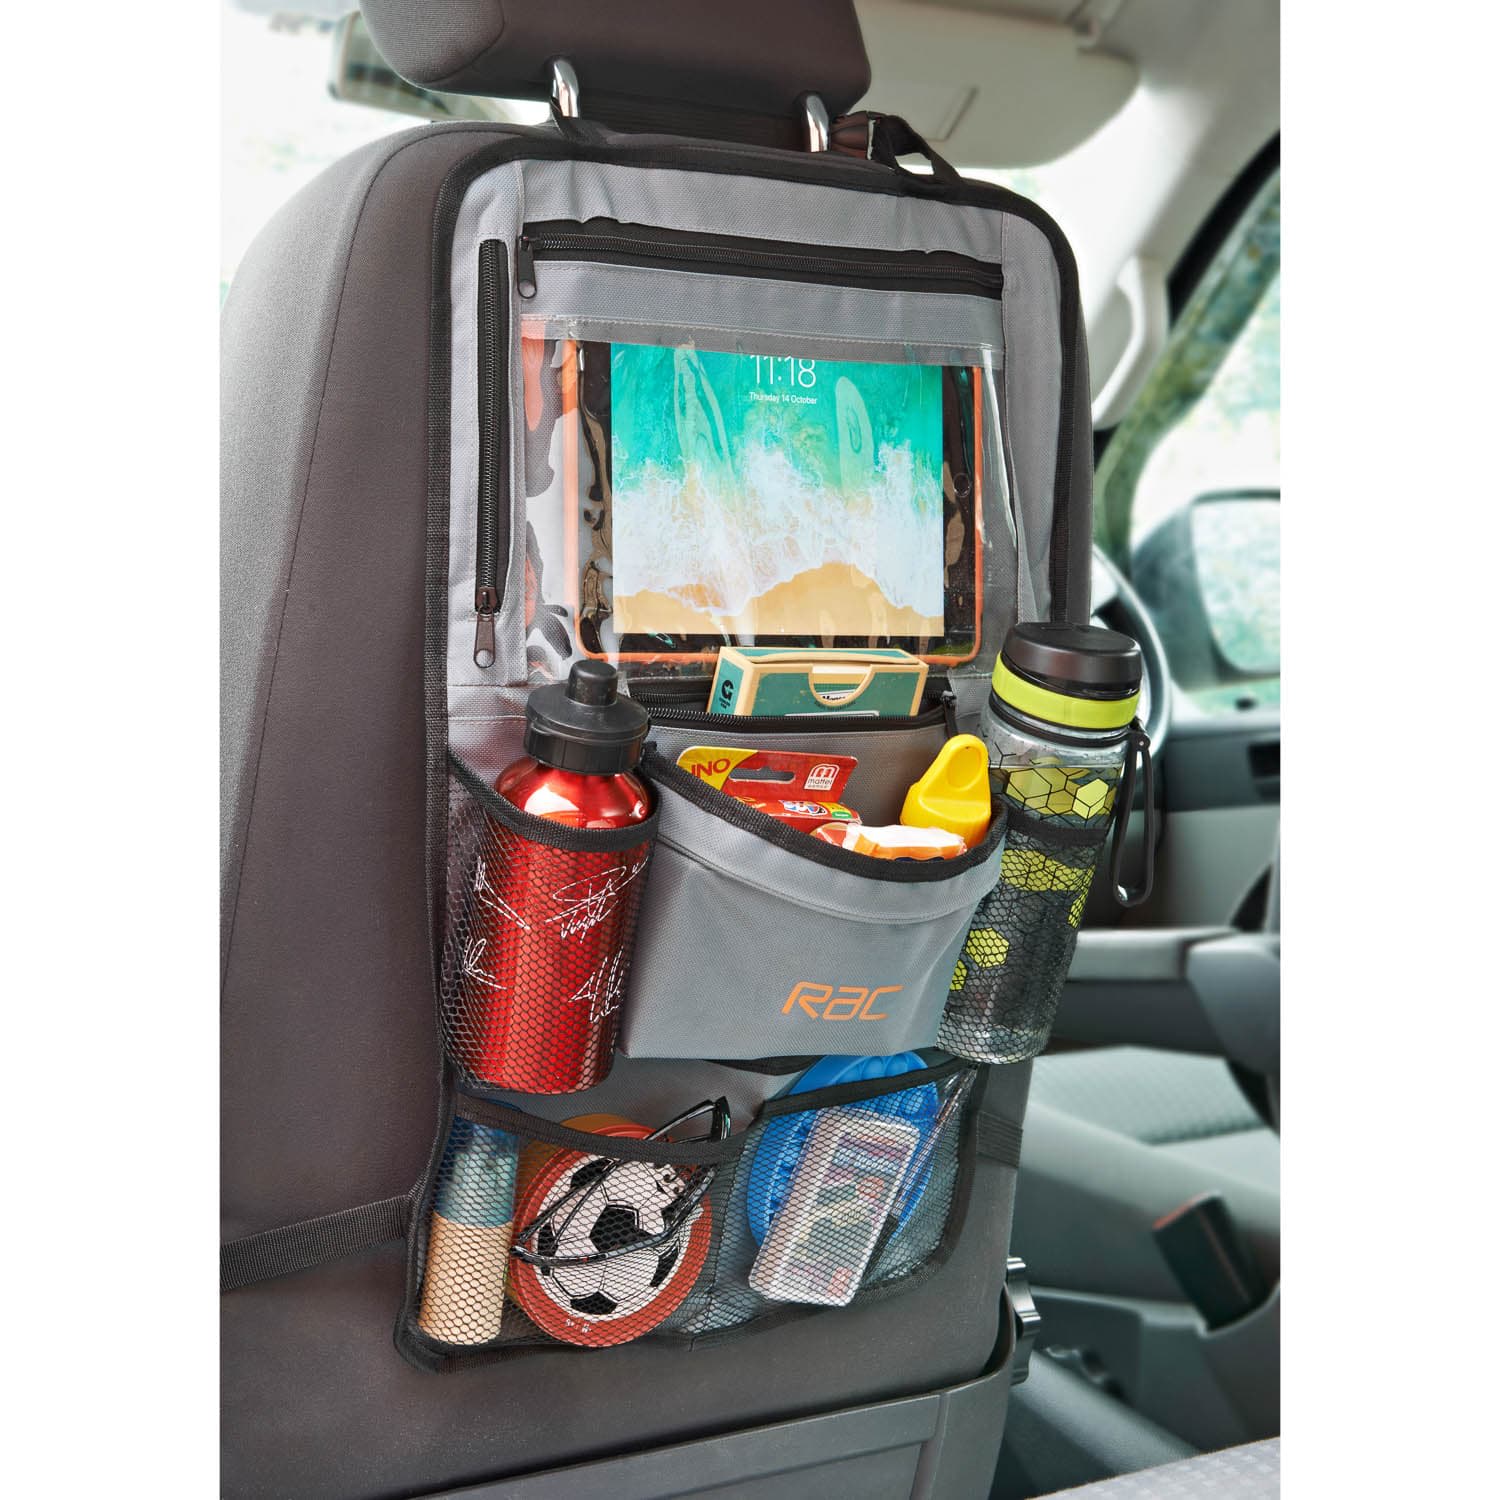 https://www.bmstores.co.uk/images/hpcProductImage/imgSource/379744-back-seat-organiser.jpg